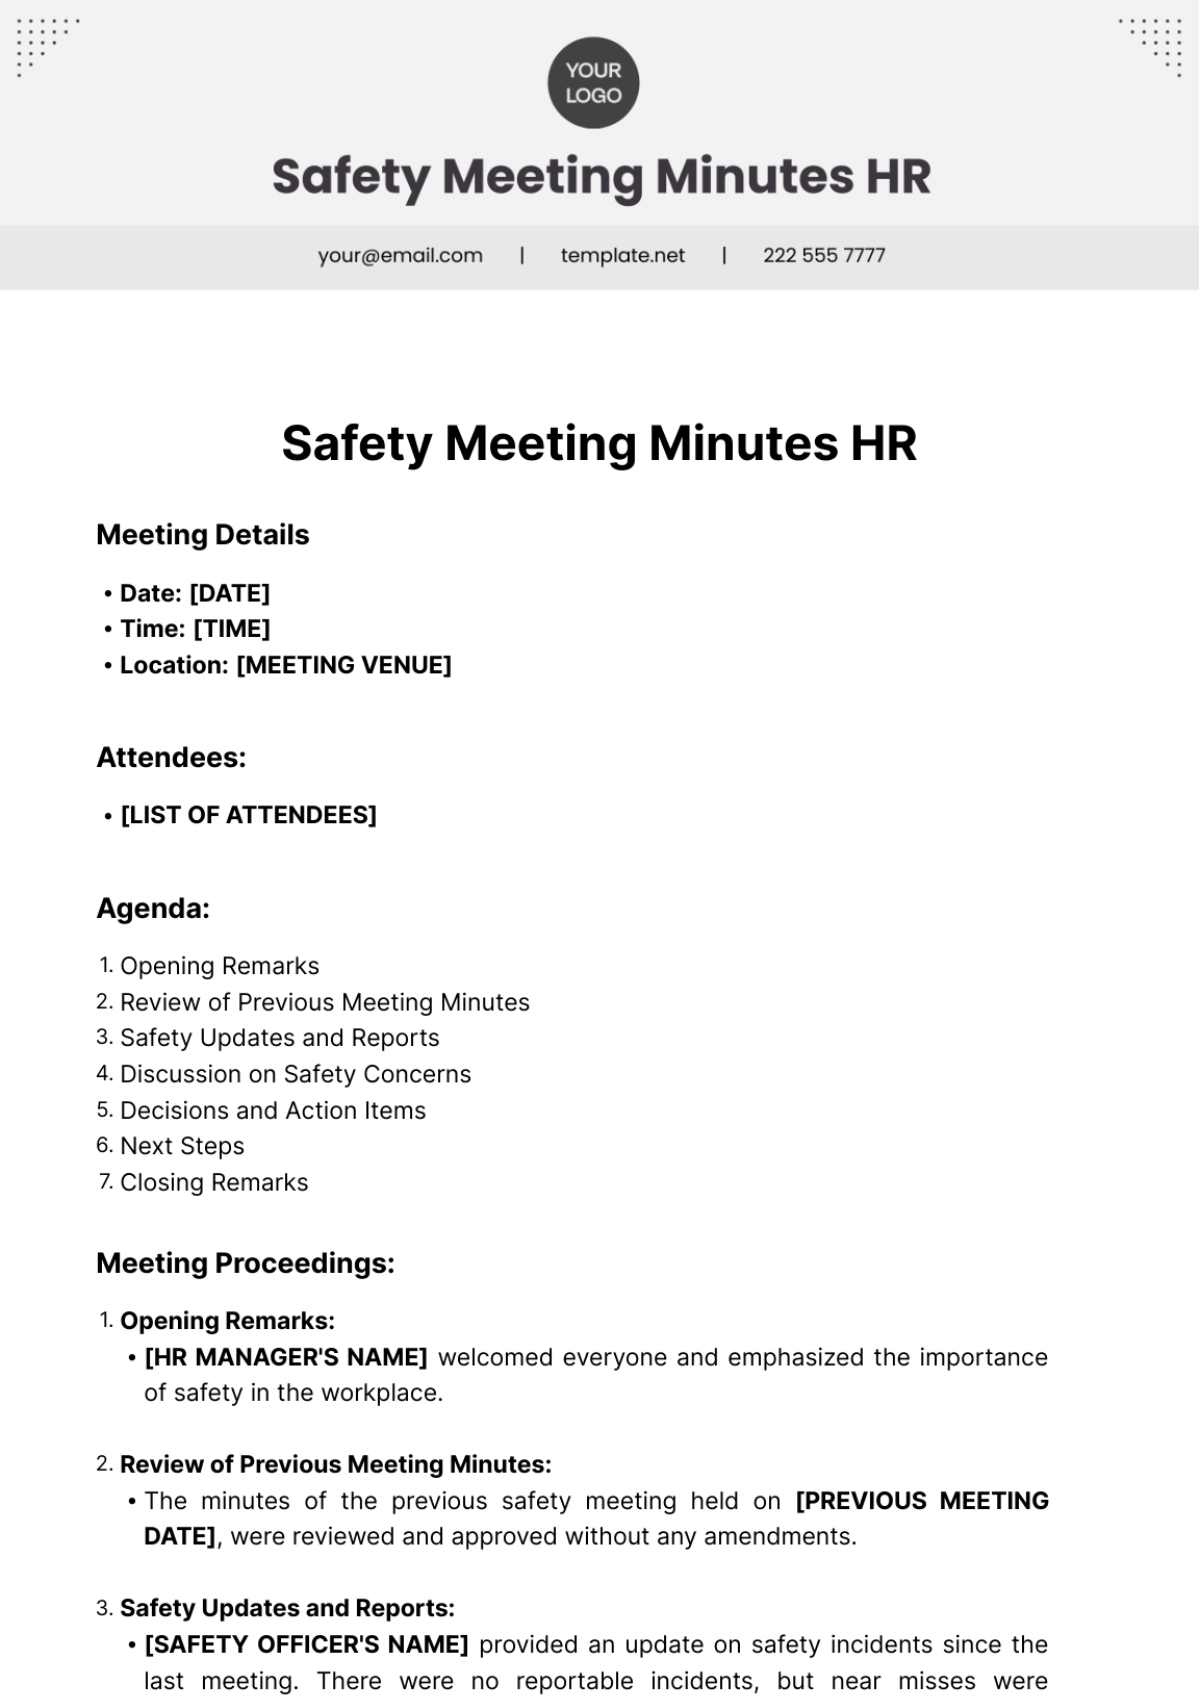 Safety Meeting Minutes HR Template